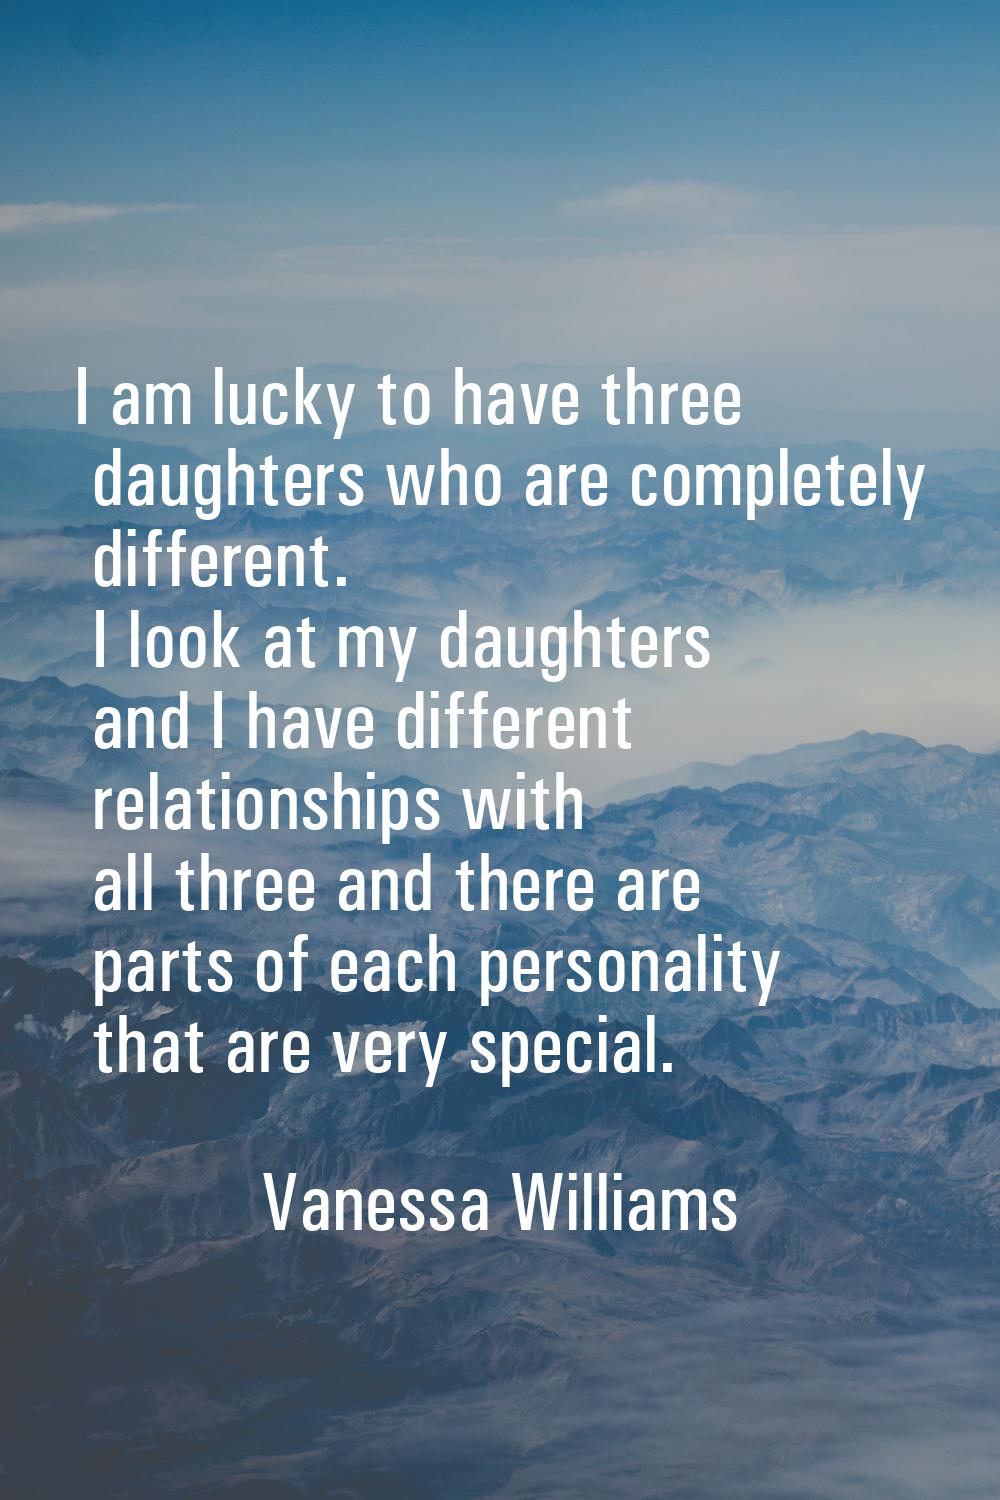 I am lucky to have three daughters who are completely different. I look at my daughters and I have 